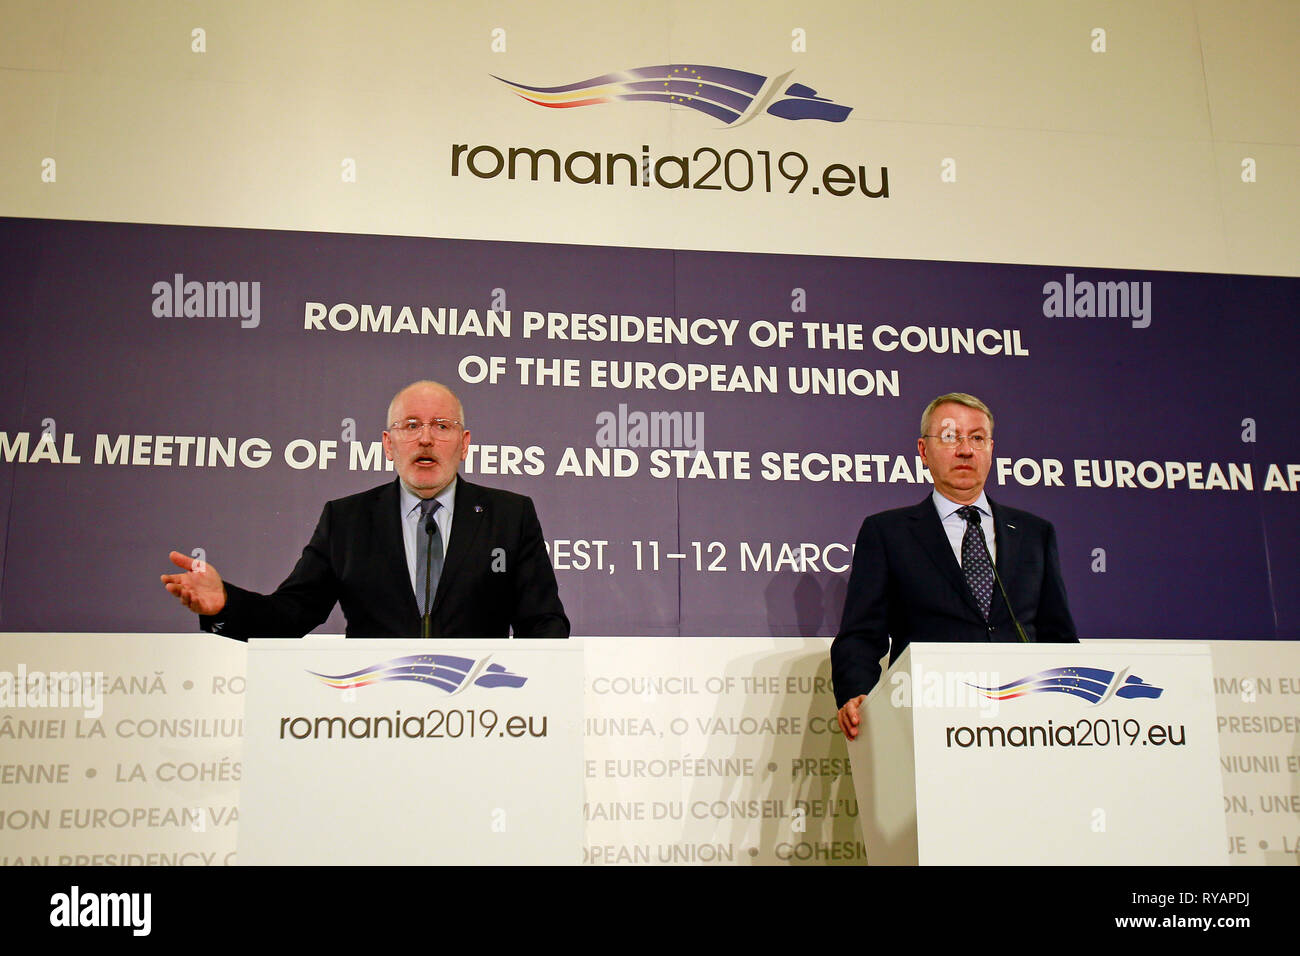 (190313) -- BUCHAREST, March 13, 2019 (Xinhua) -- First Vice-President of the European Commission Frans Timmermans (L) attends a joint news conference with the Romanian Minister for European Affairs George Ciamba in Bucharest, Romania, March 12, 2019. The future Multiannual Financial Framework of the European Union (EU) must respond both to the priorities of the EU and to the unexpected new challenges, Timmermans said here on Tuesday. (Xinhua/Cristian Cristel) Stock Photo